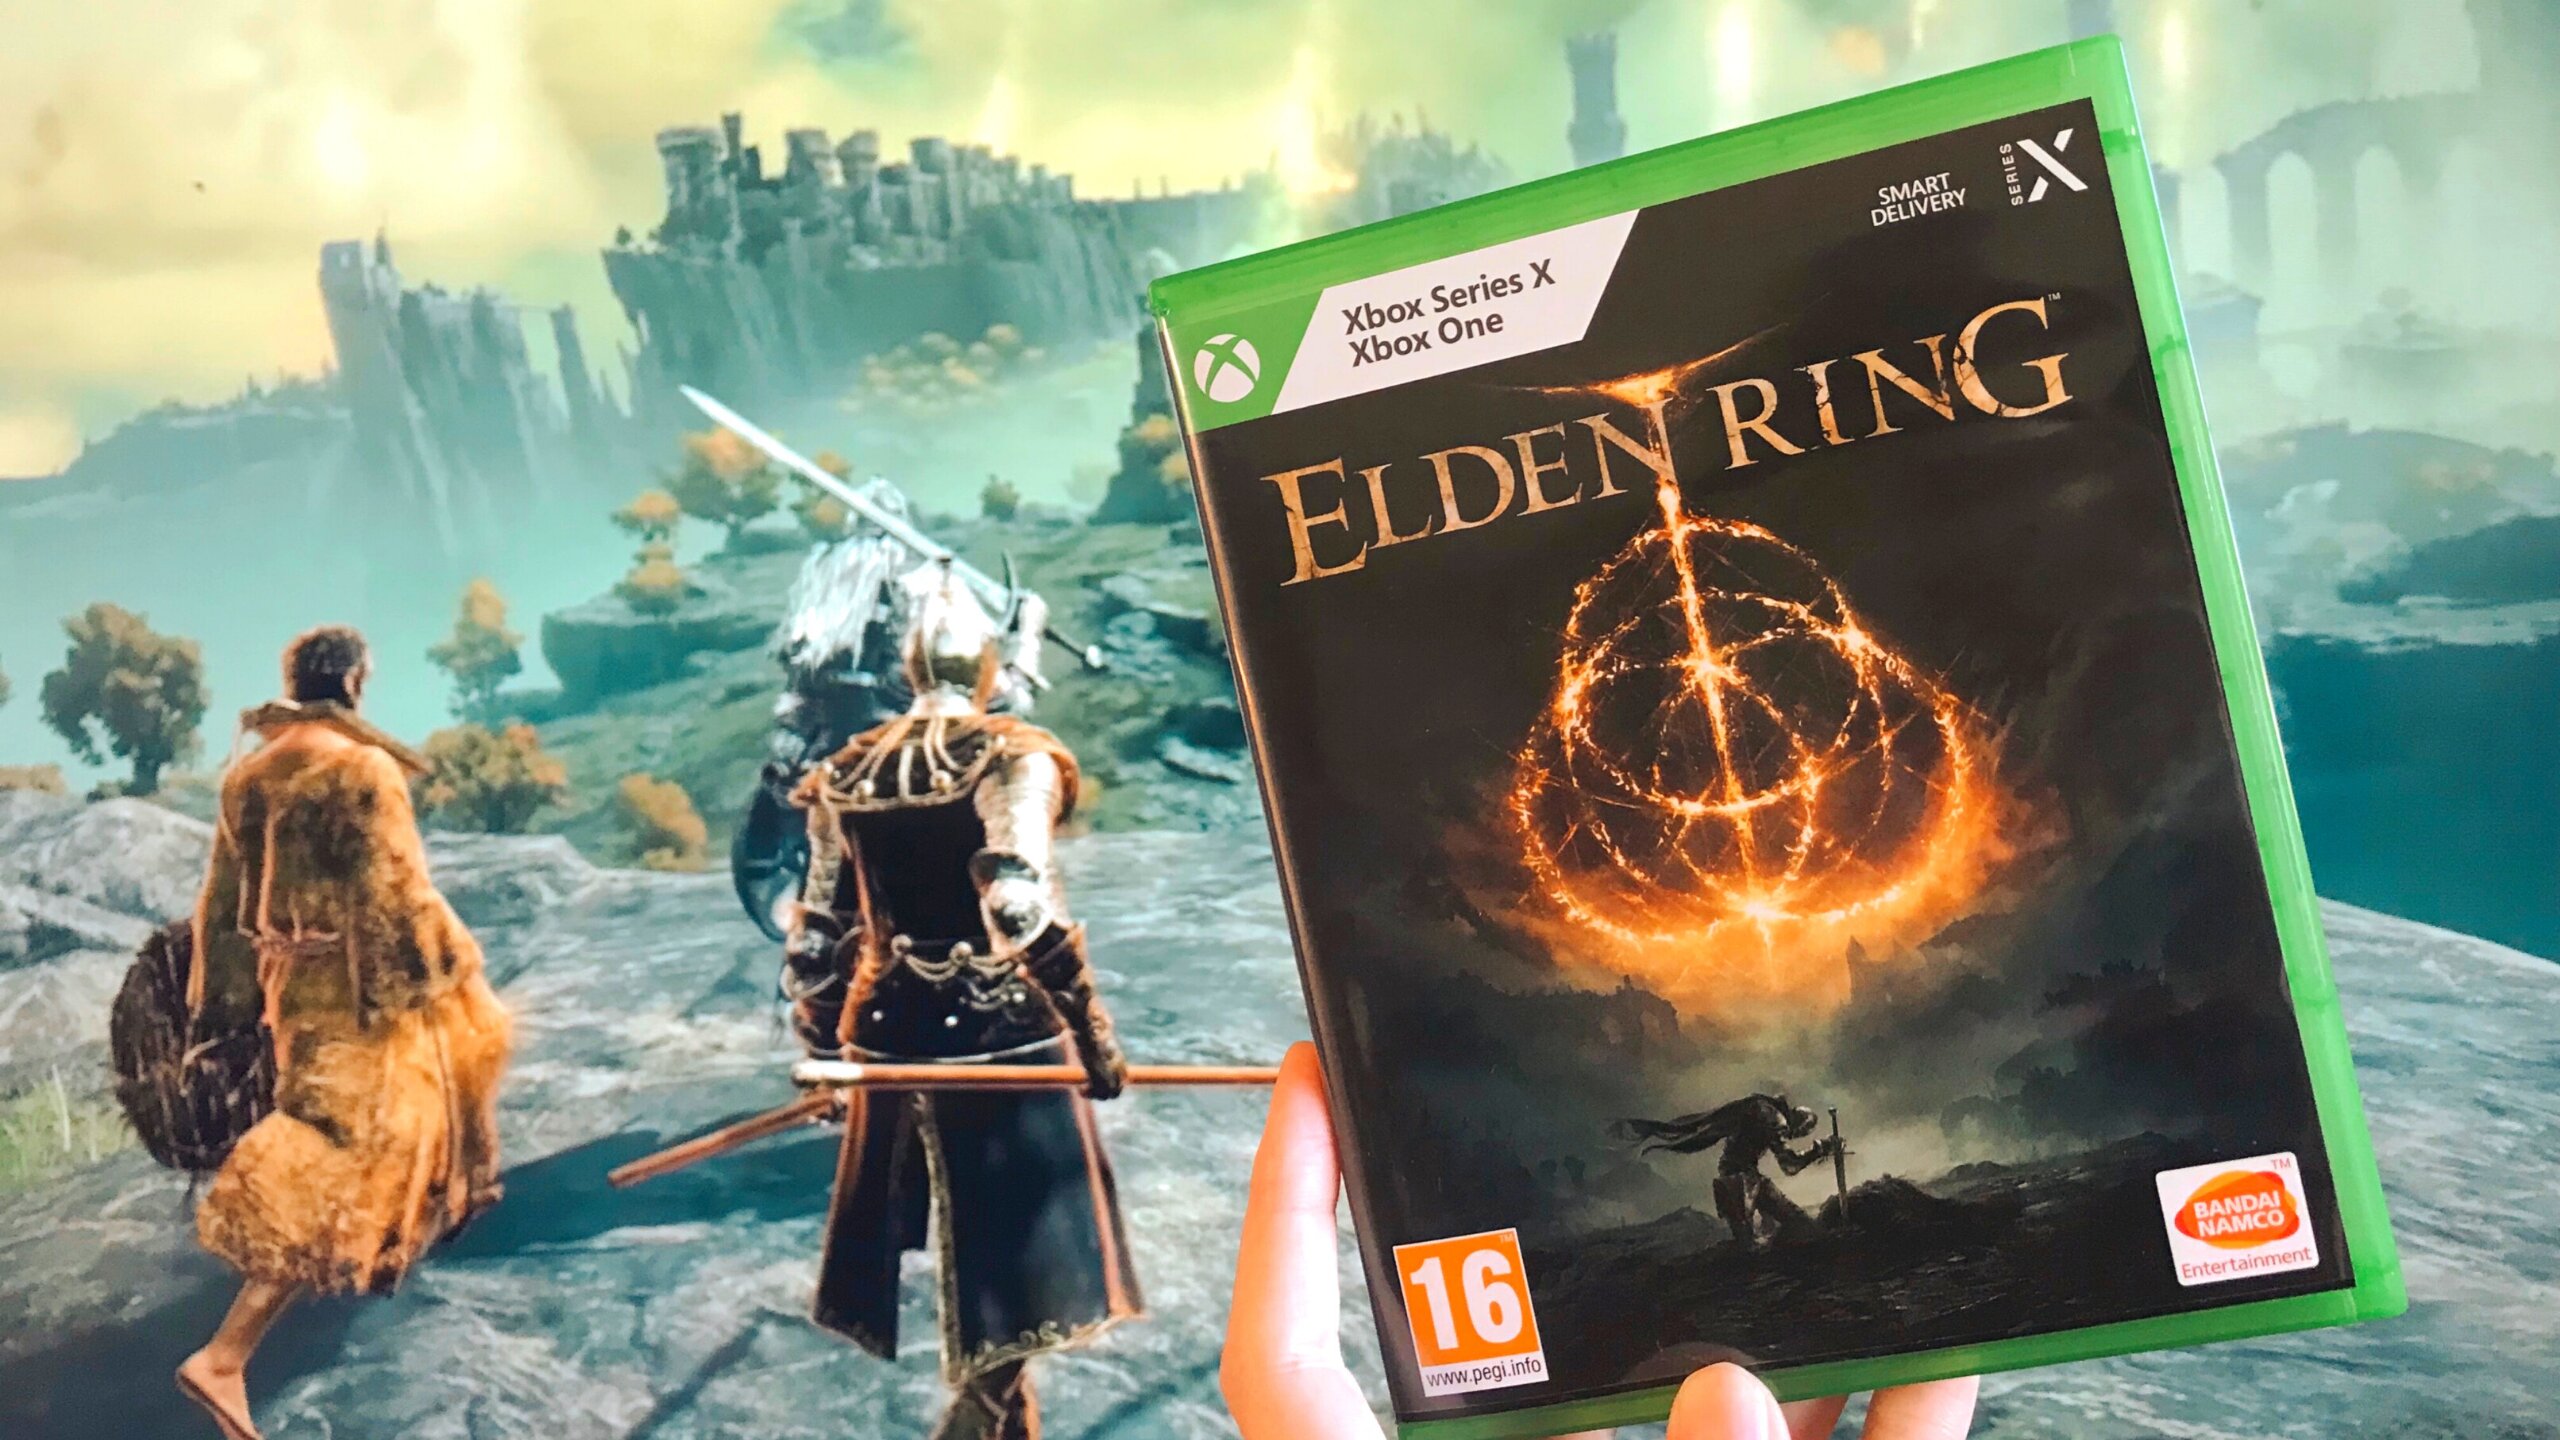 Elden Ring Speculated as the Most Popular Game of 2022